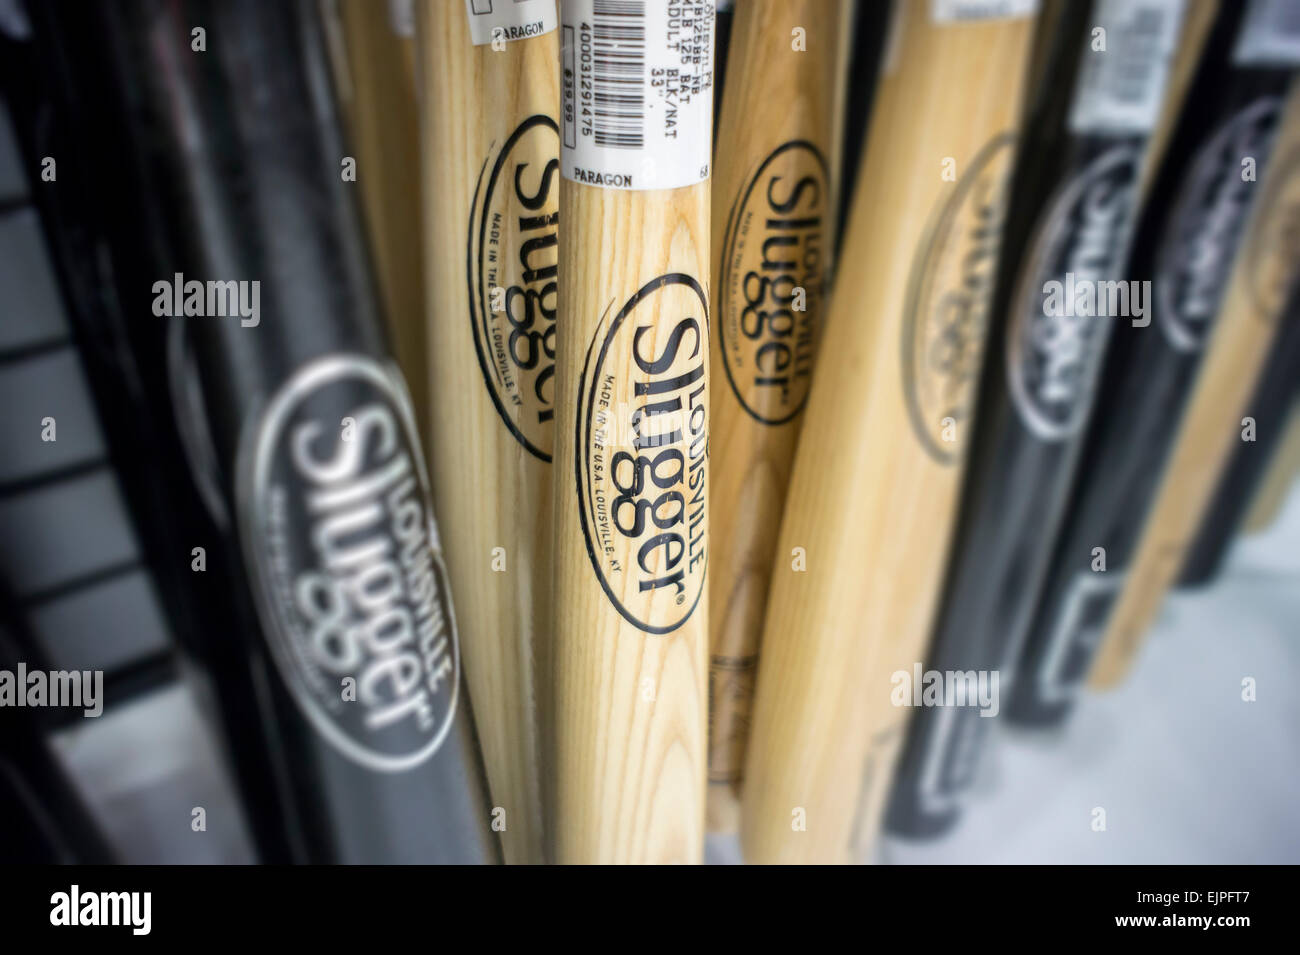 Louisville Slugger brand baseball bats on display in a store in New York on  Tuesday, March 24, 2015. The 121 year old iconic brand has been sold,  pending shareholder approval, by Hillerich